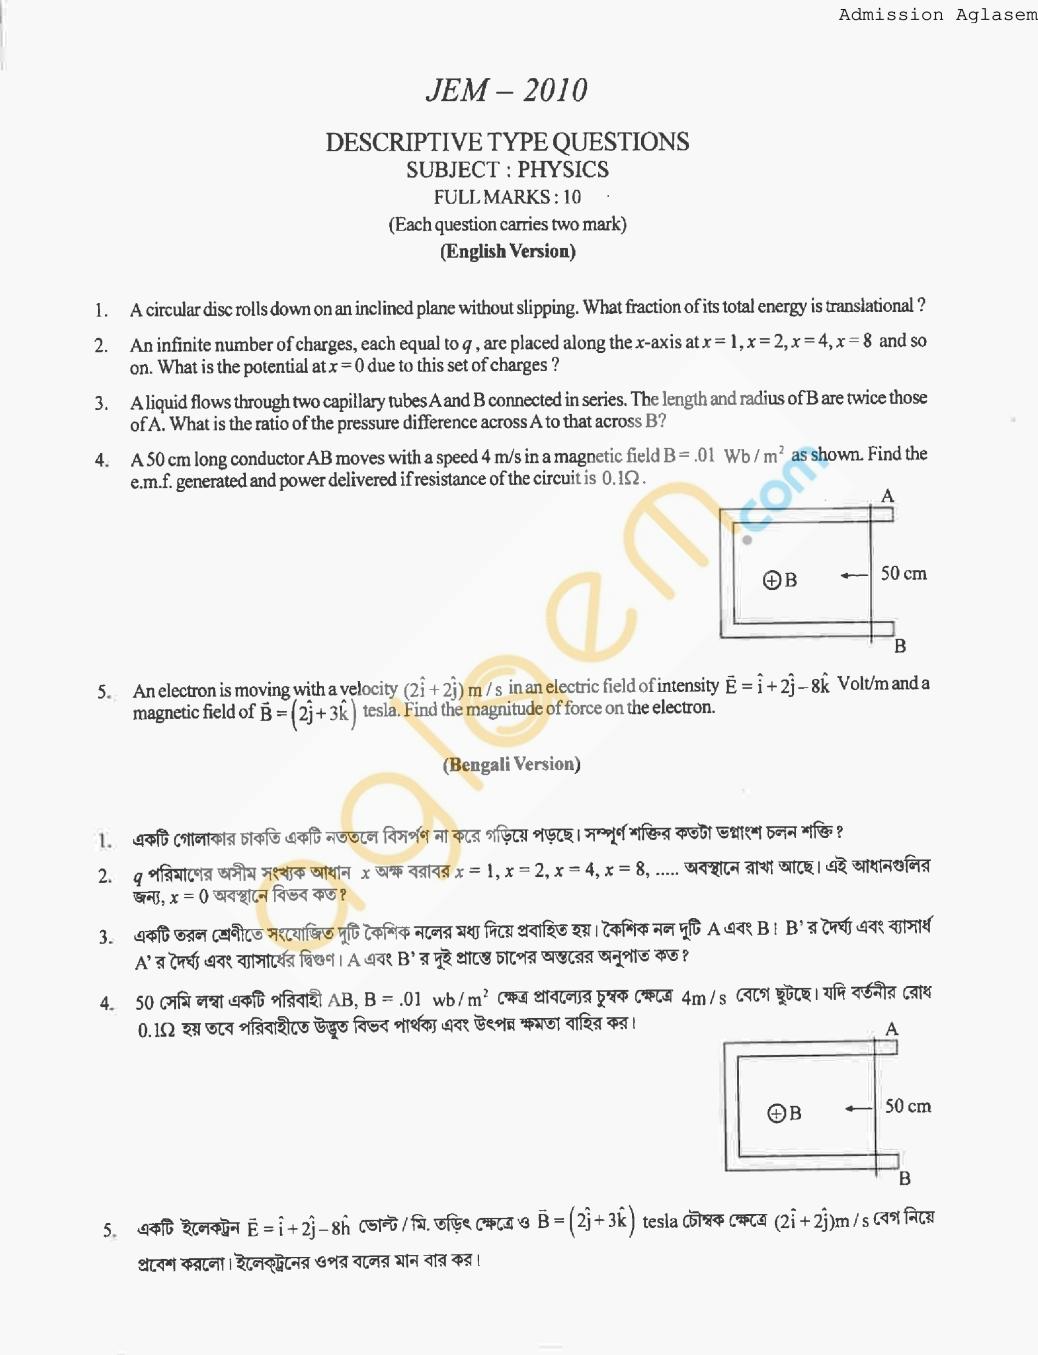 WBJEE Question Papers 2010 - Physics & Chemistry - Page 1